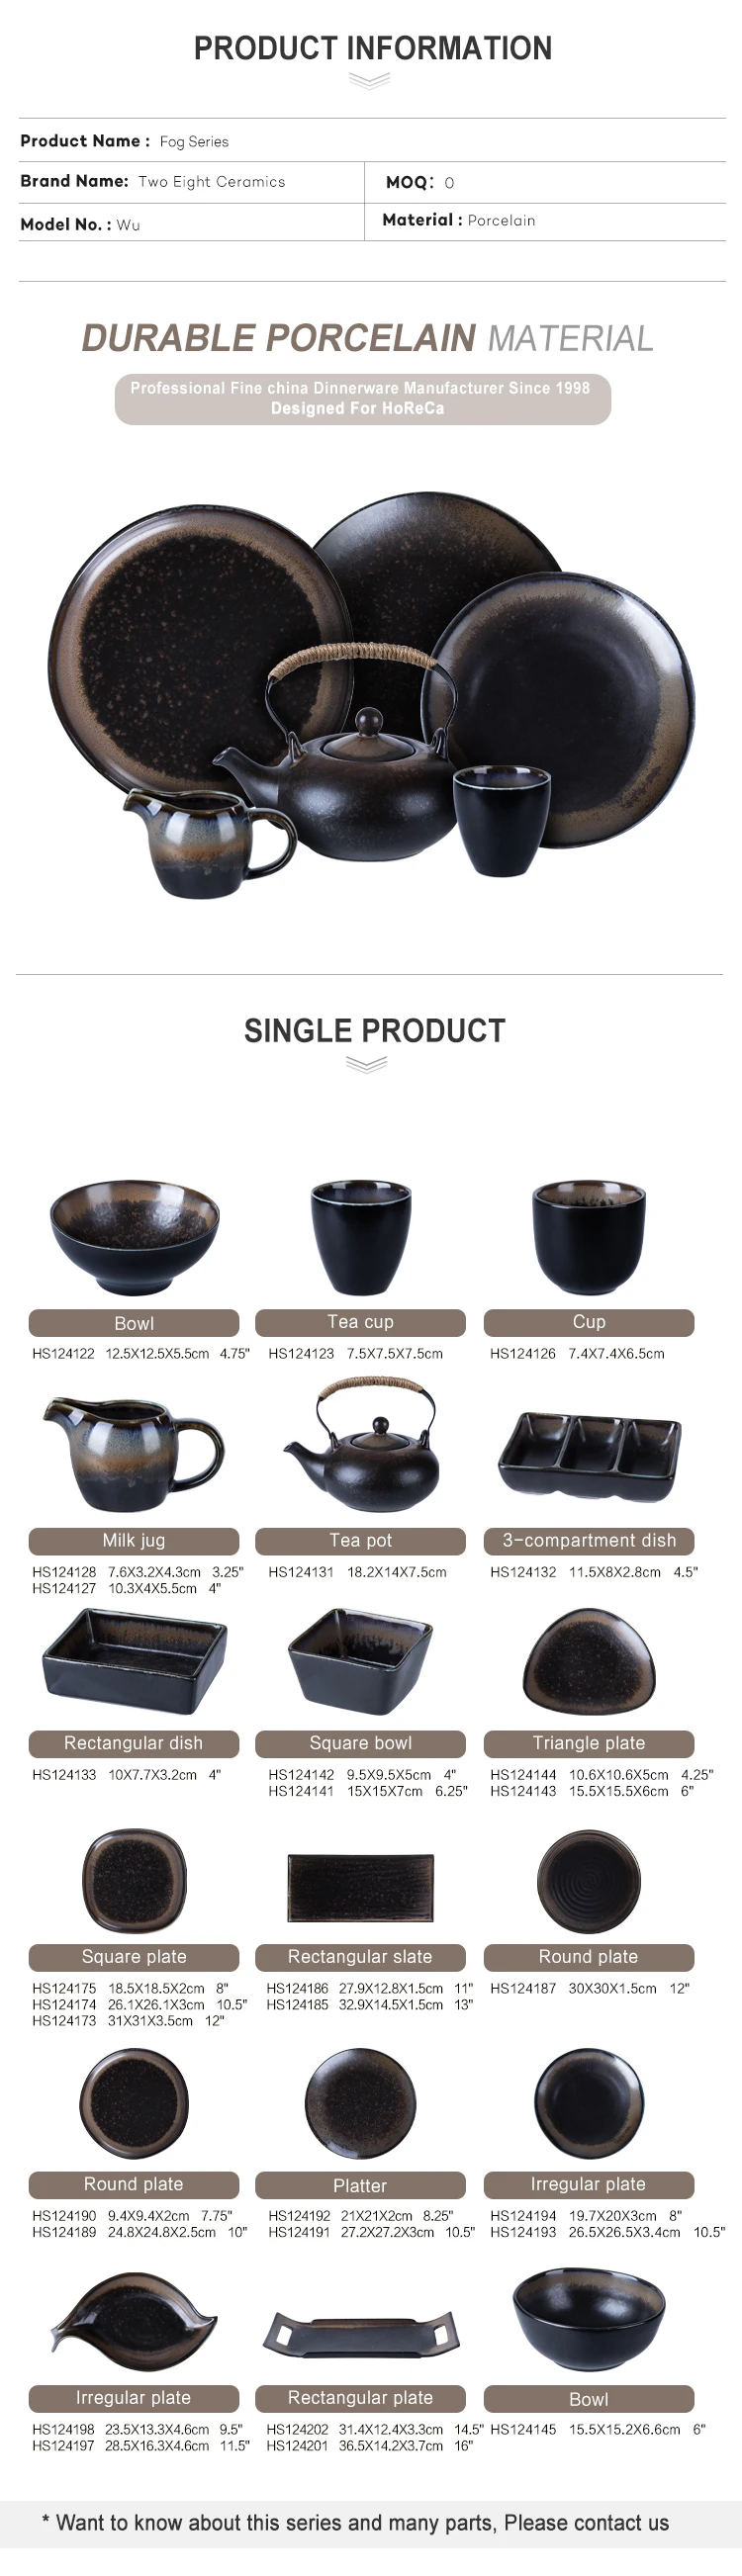 Wholesale Rustic Kitchen Ceramic Dinnerware Sets Janpanses Style For Hotel Restaurant, Catering Porcelain Tableware Sets